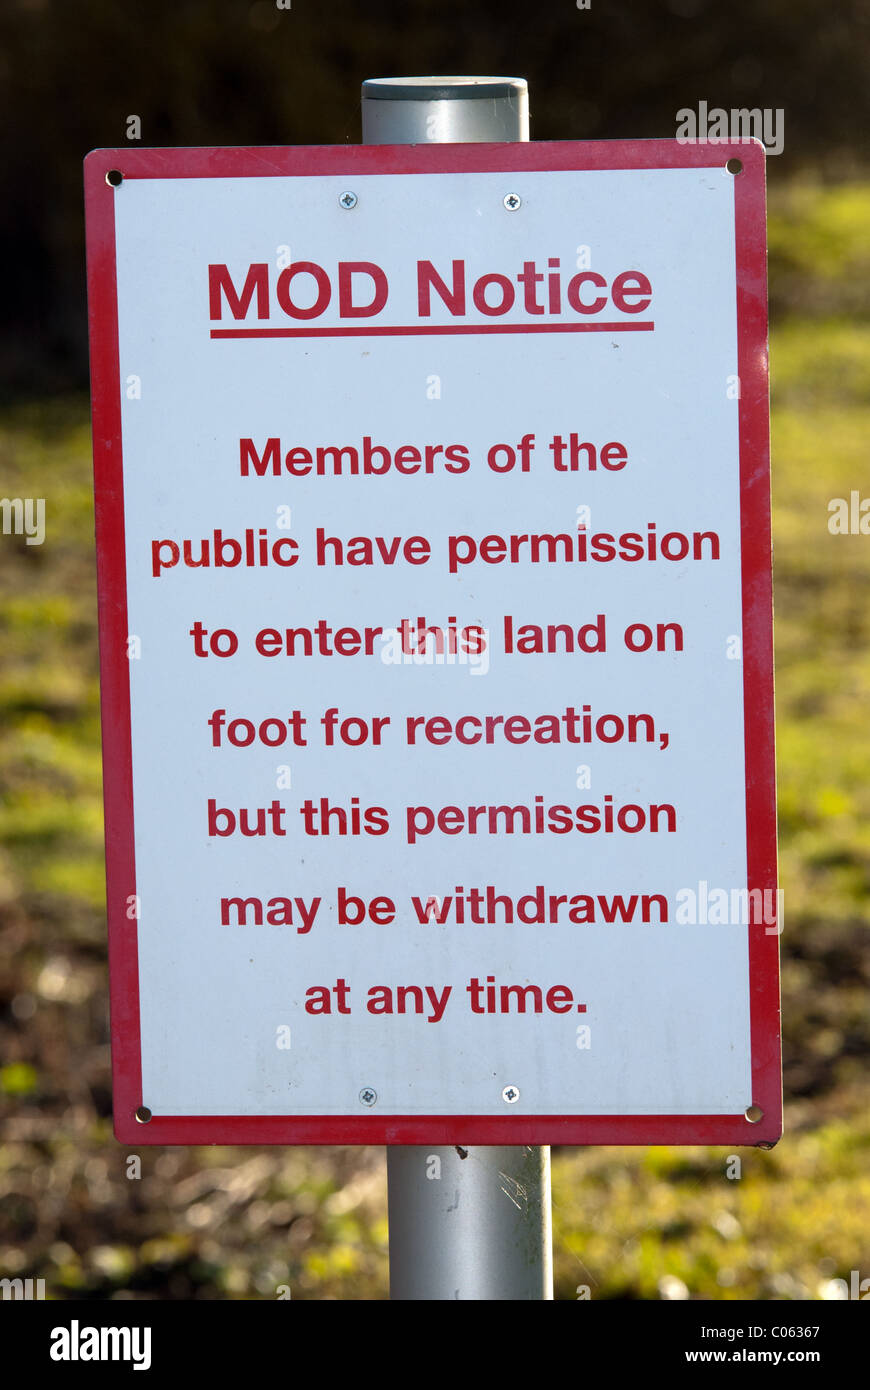 A UK MOD warning sign advising the public that they have access, but that access can be withdrawn at any time. In a UK village. Stock Photo